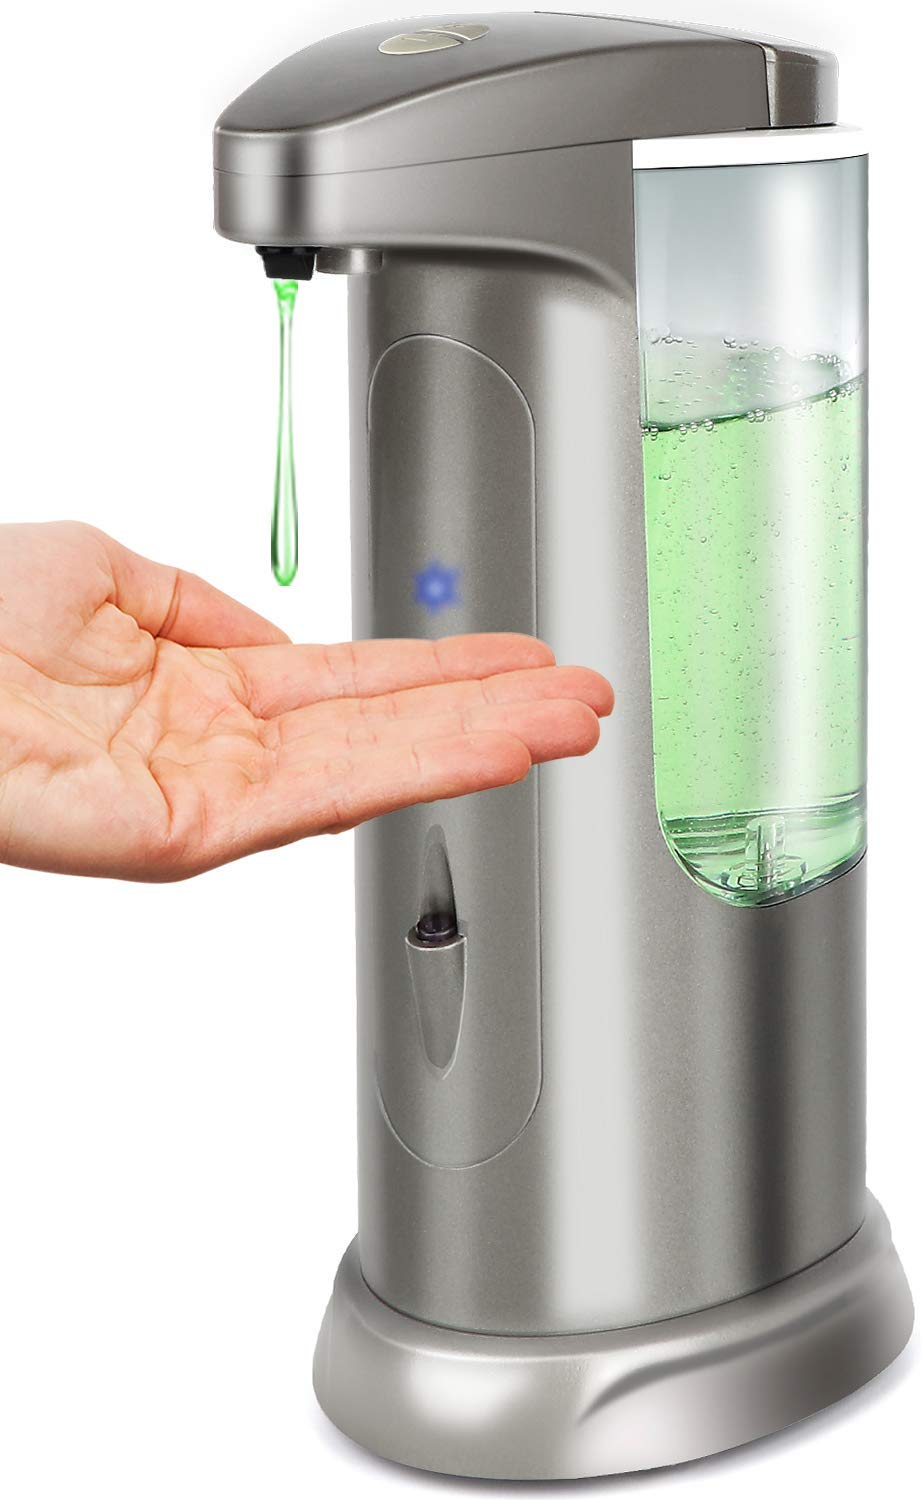 Hanamichi Soap Dispenser, Touchless High Capacity Automatic Soap Dispenser Equipped